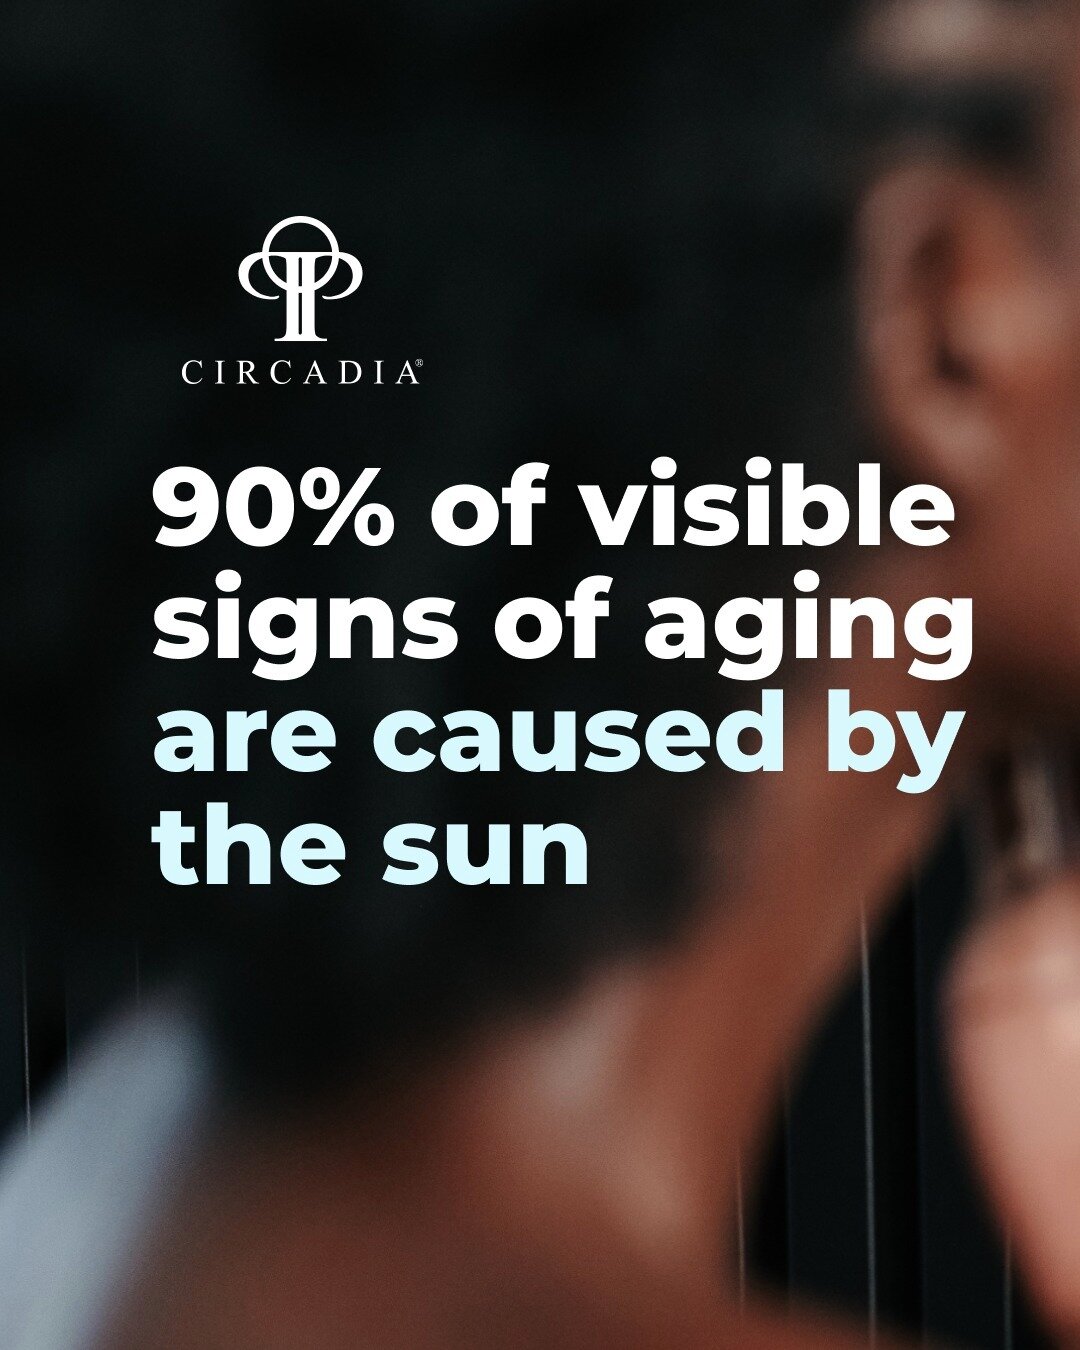 Prevent sundamage with Circadia's Light Day SPF37.  This sunscreen contains a special ingredient called SolaStay which is an award-winning photostabilizer. It is specificaly designed to protect Avobenzone and Octinoxate from breaking down when expose